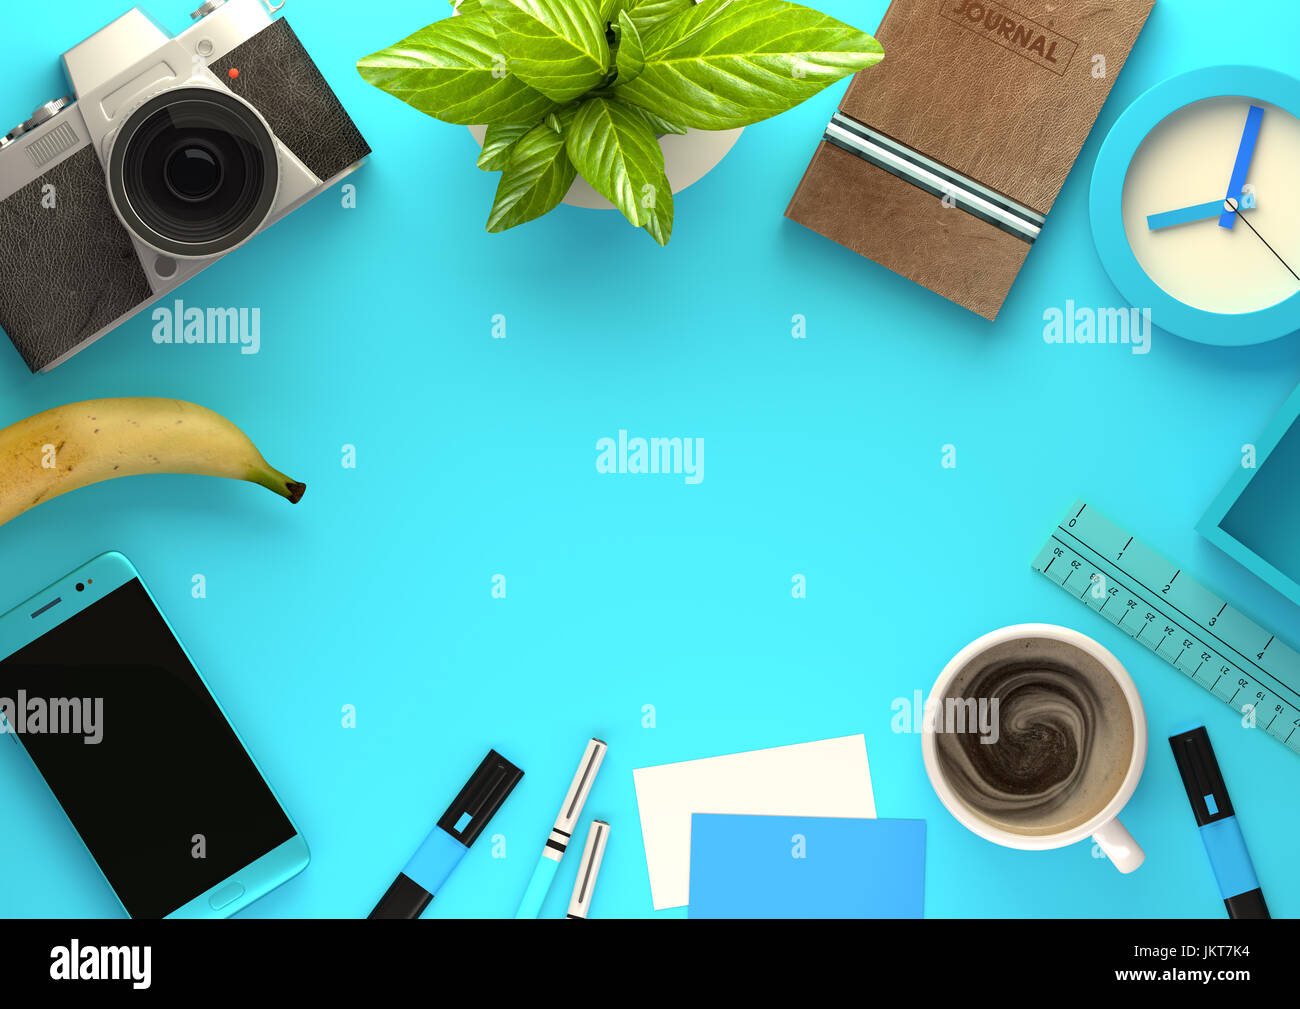 Top down view of modern work space office desk with essentials including coffee, office plant, mobile device, camera, food snacks and business tools - Stock Photo